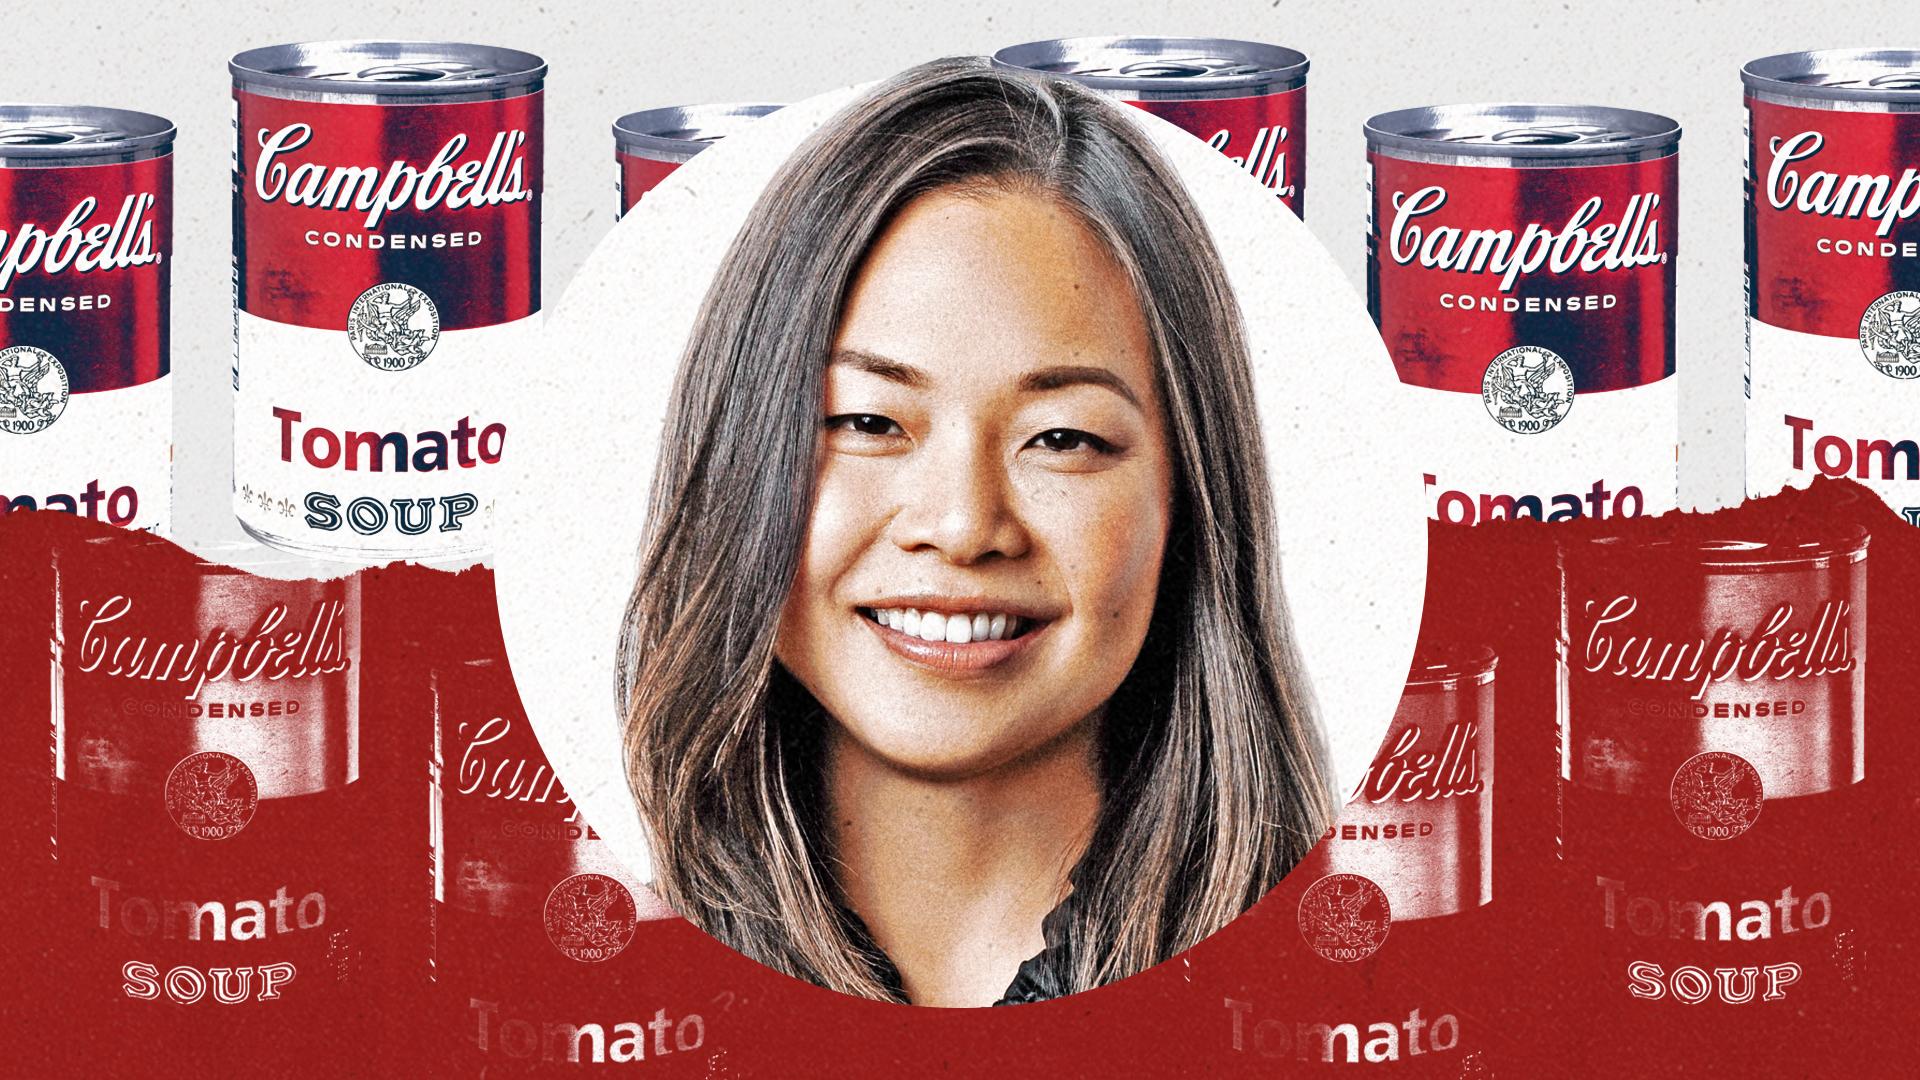 CMO Spotlight: Campbell’s Linda Lee on marketing an iconic brand in real time